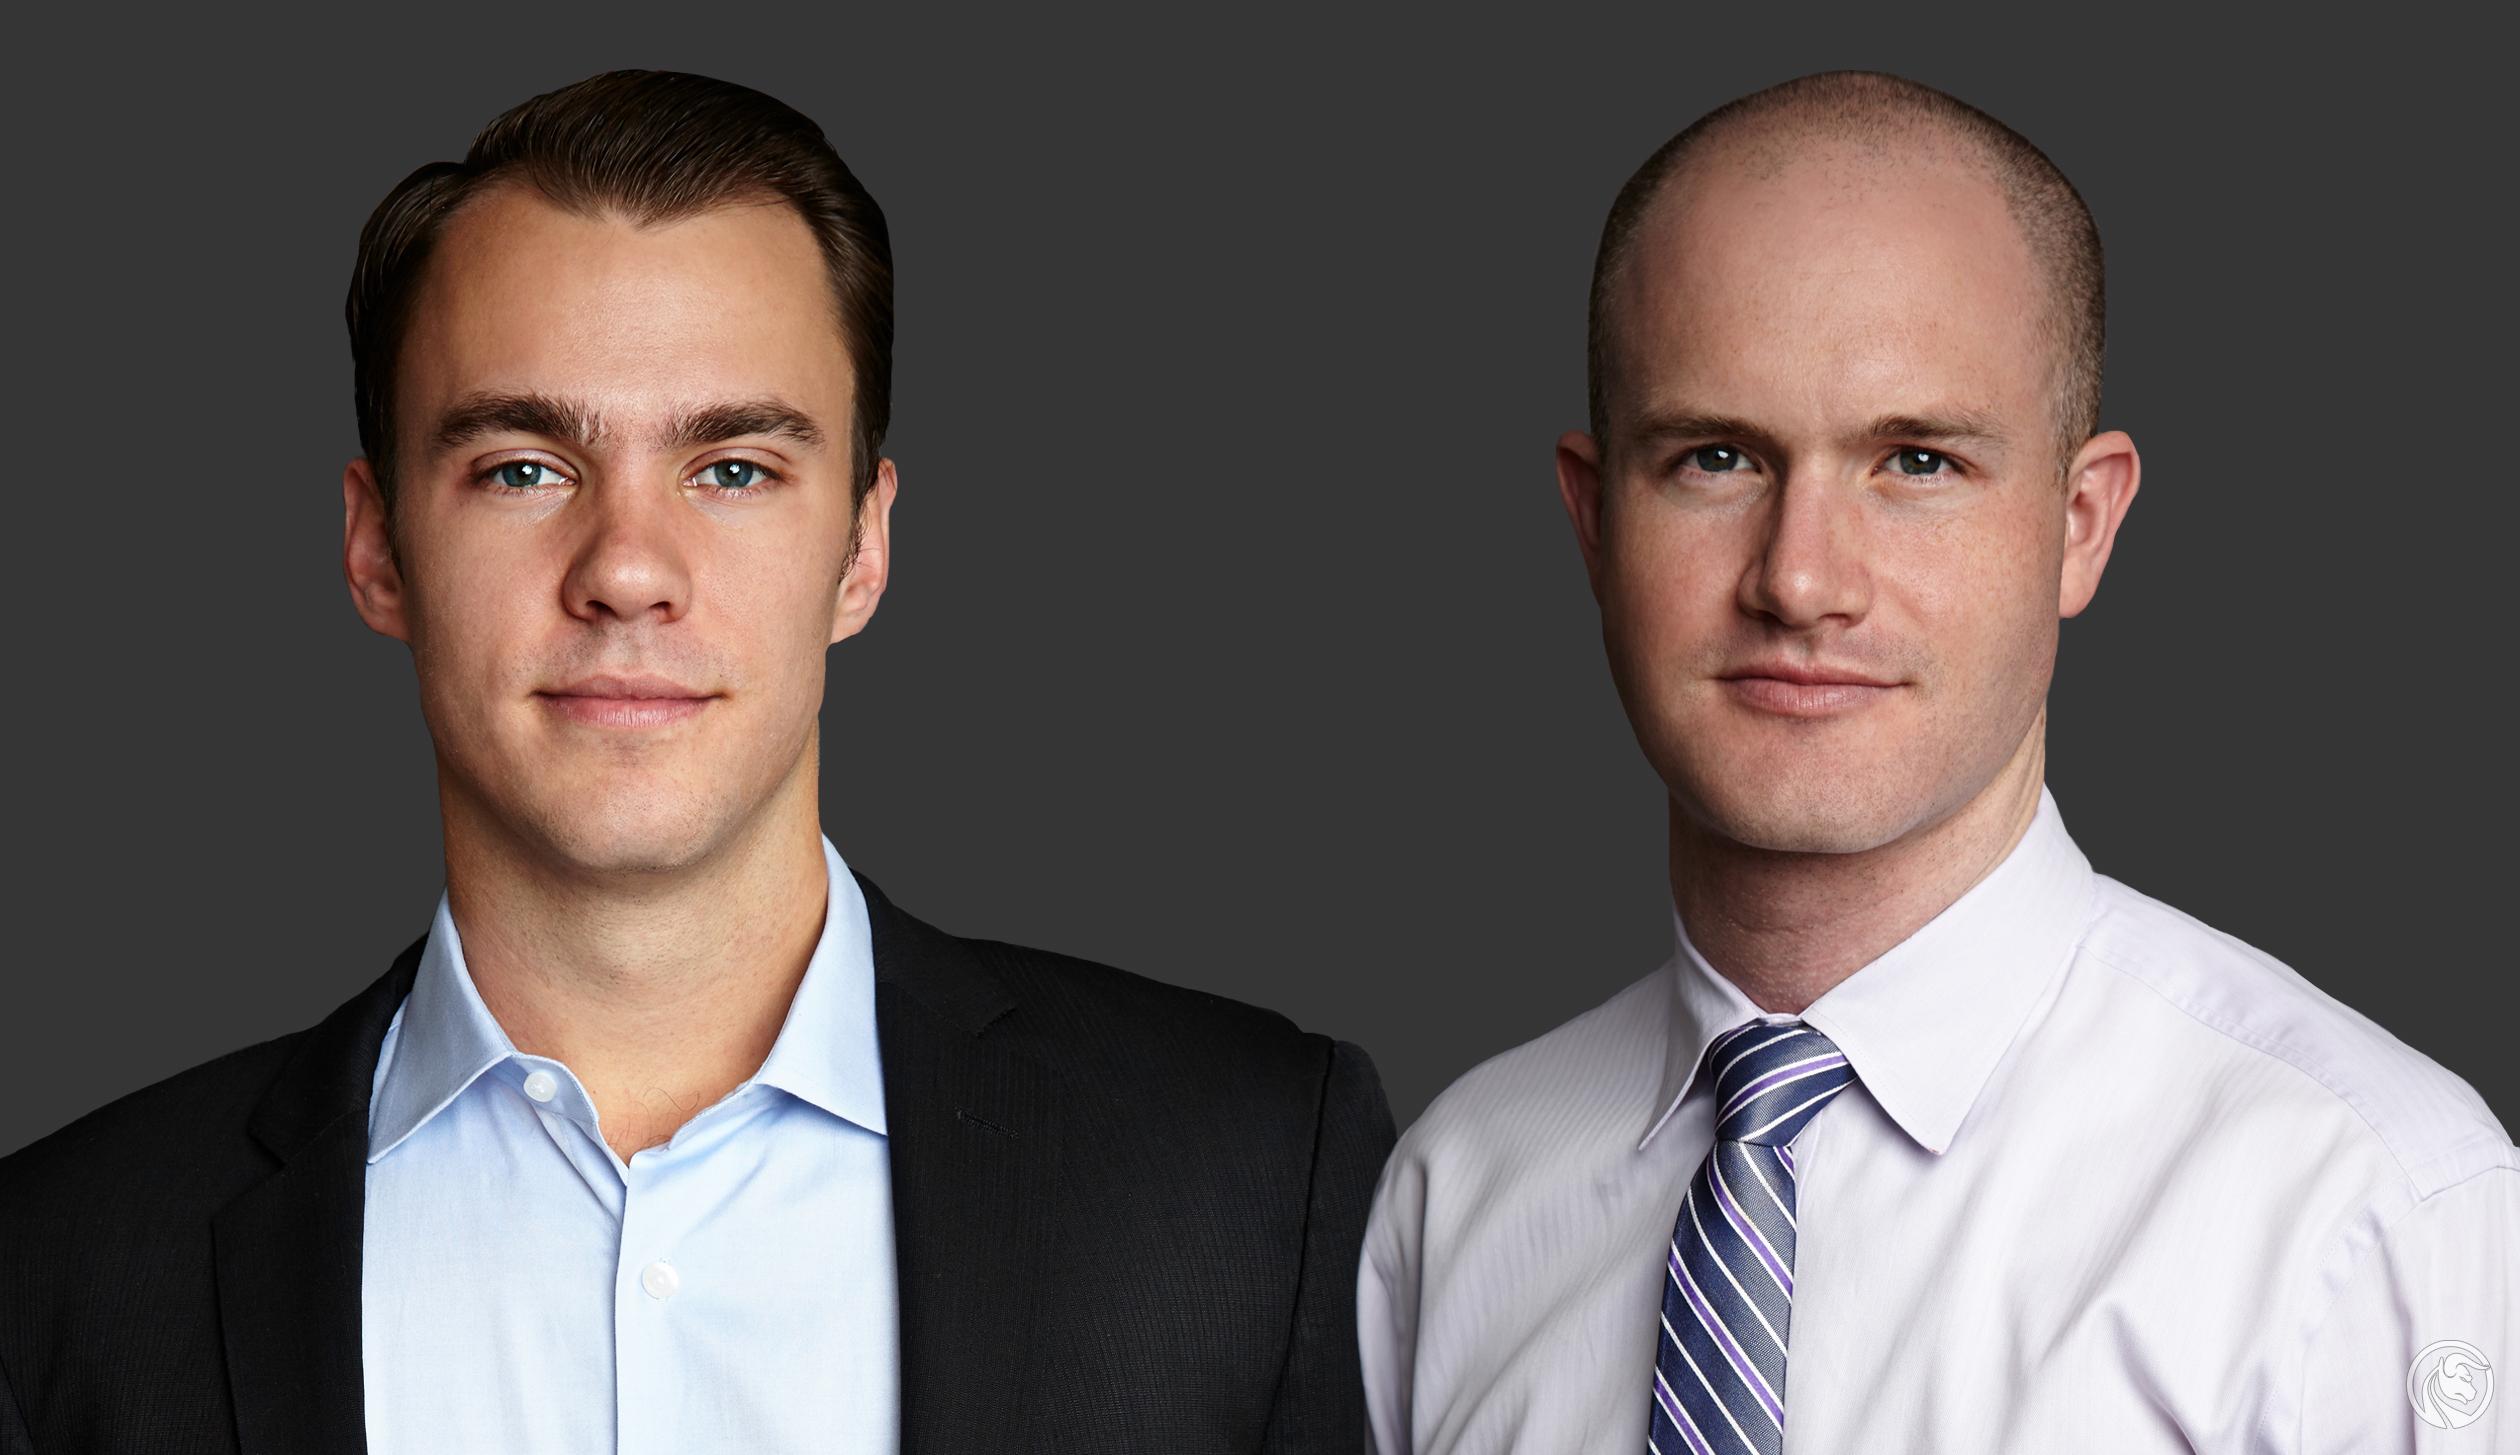 Brian Armstrong et Fred Ehrsam coinbase